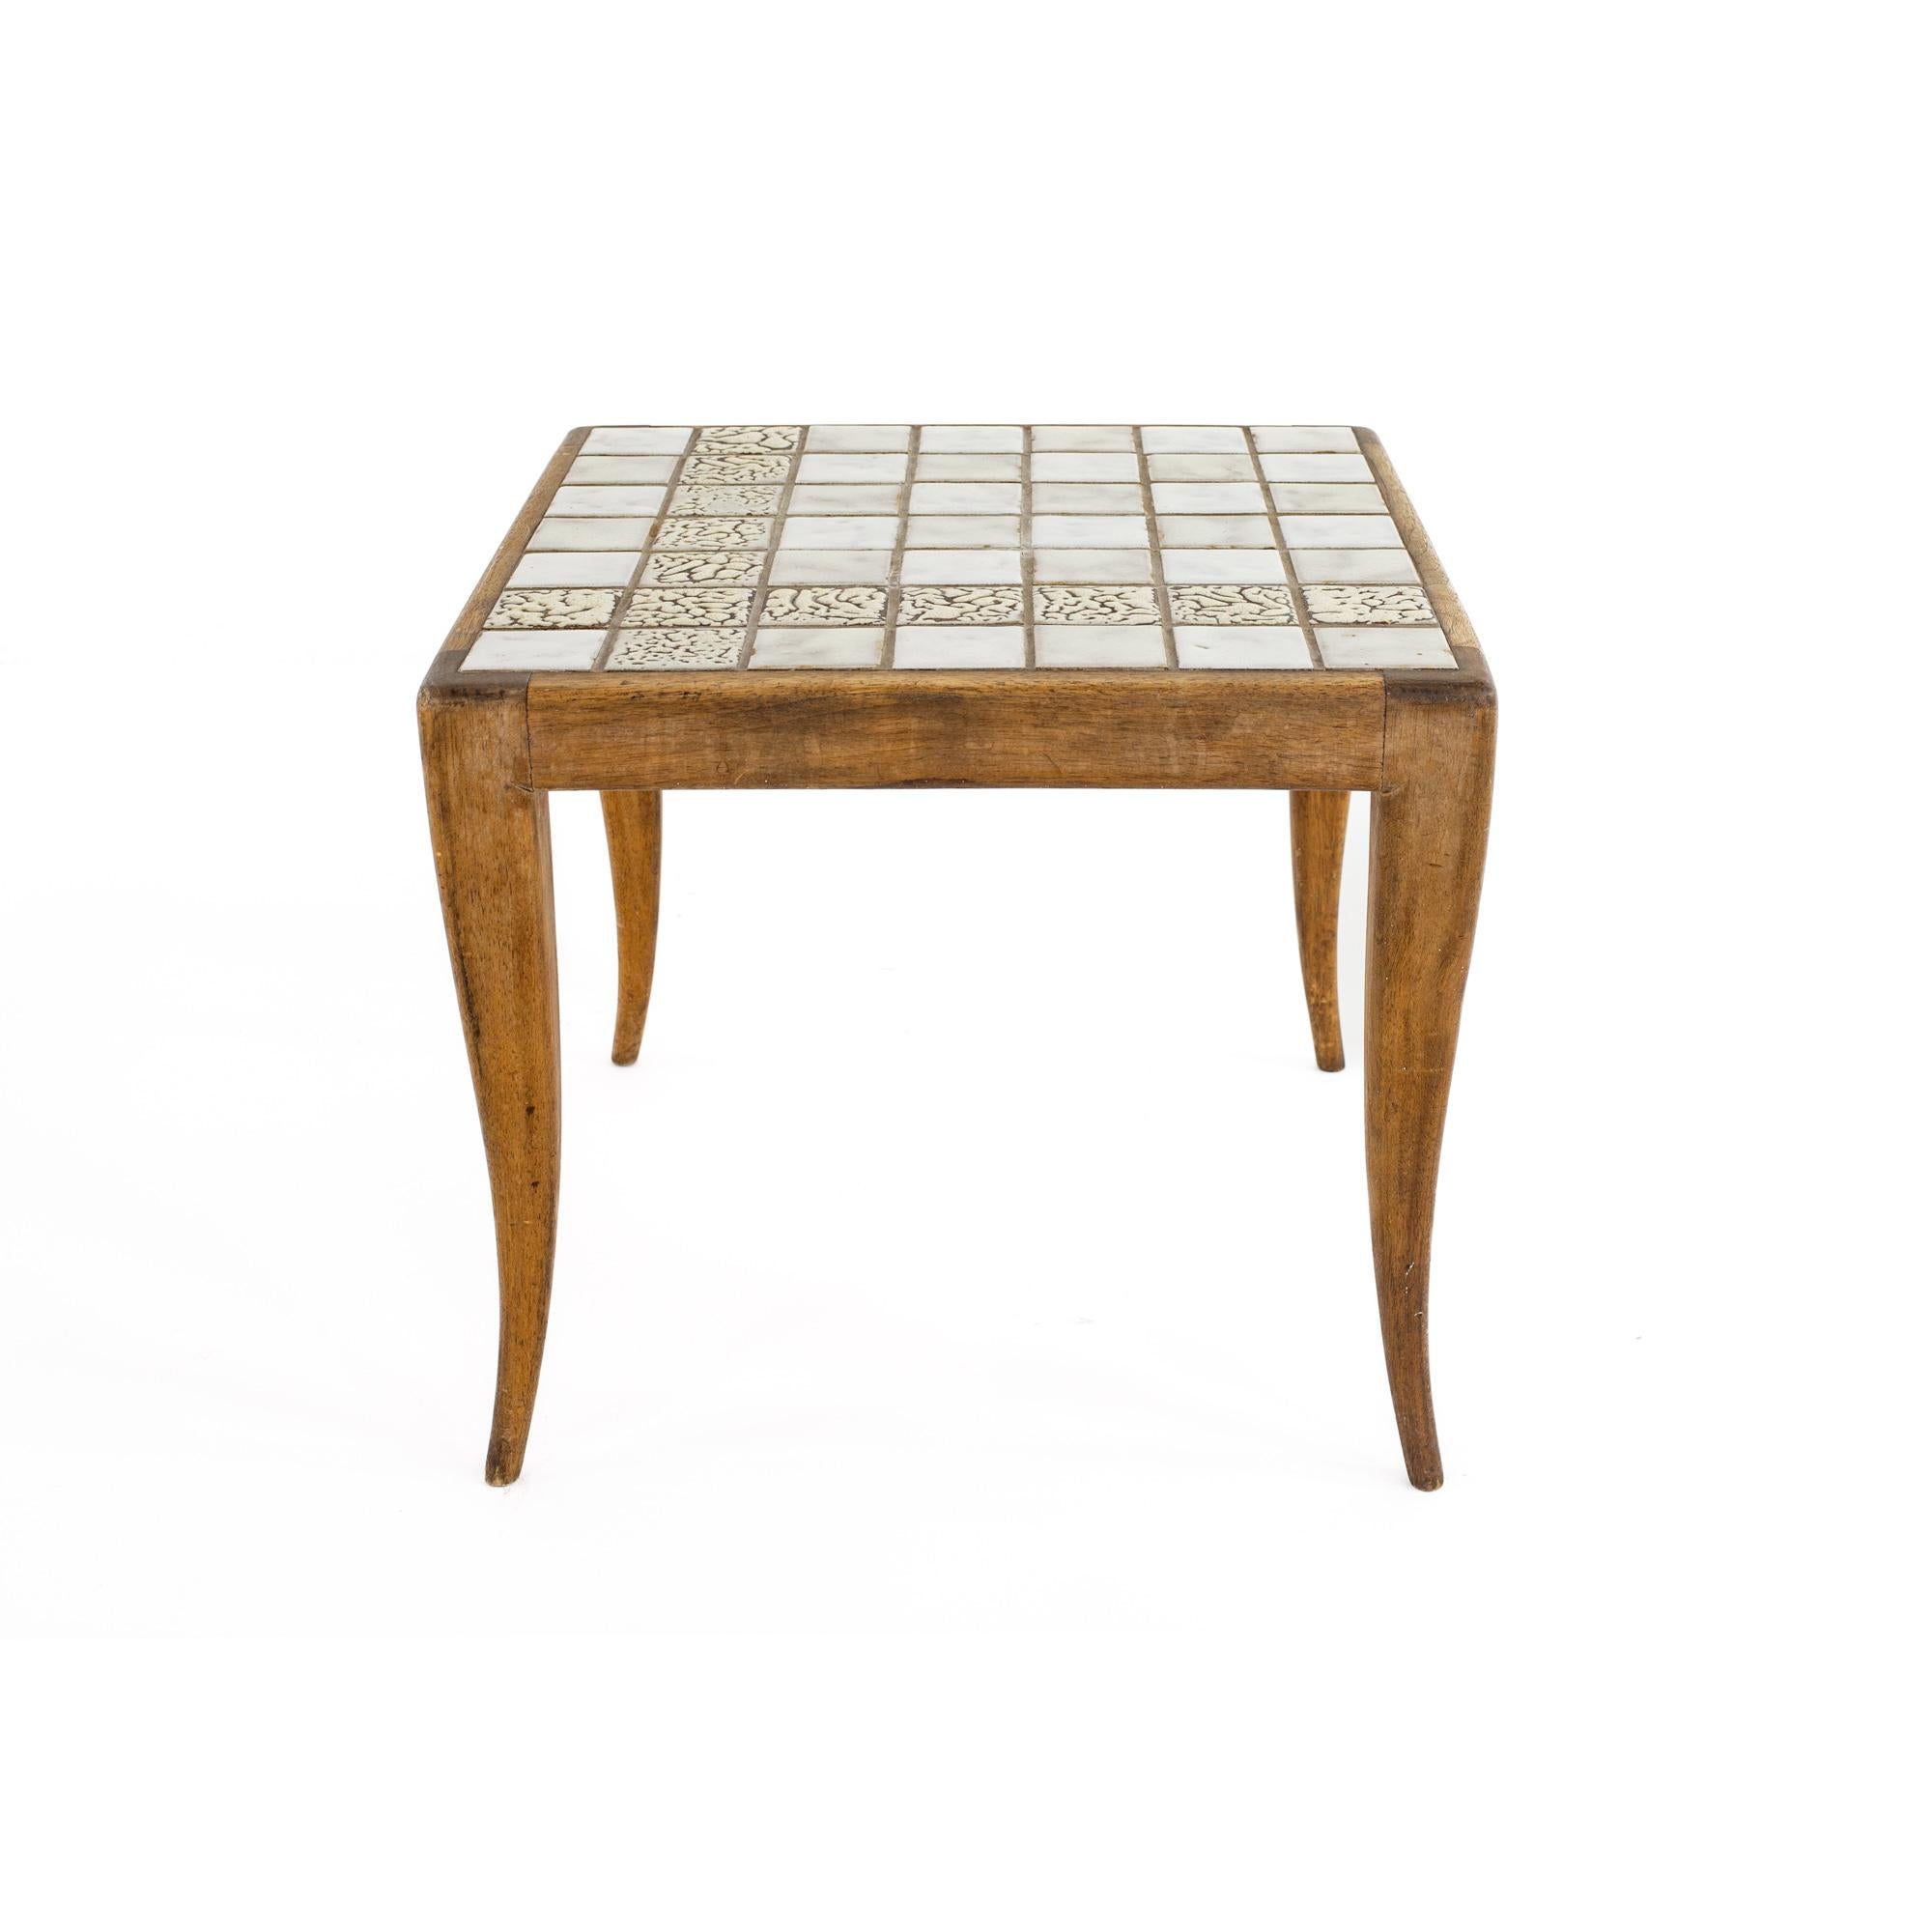 Robsjohn Gibbings style mid century tile top side table

This table measures: 17.5 wide x 17.5 deep x 15 inches high

All pieces of furniture can be had in what we call restored vintage condition. That means the piece is restored upon purchase